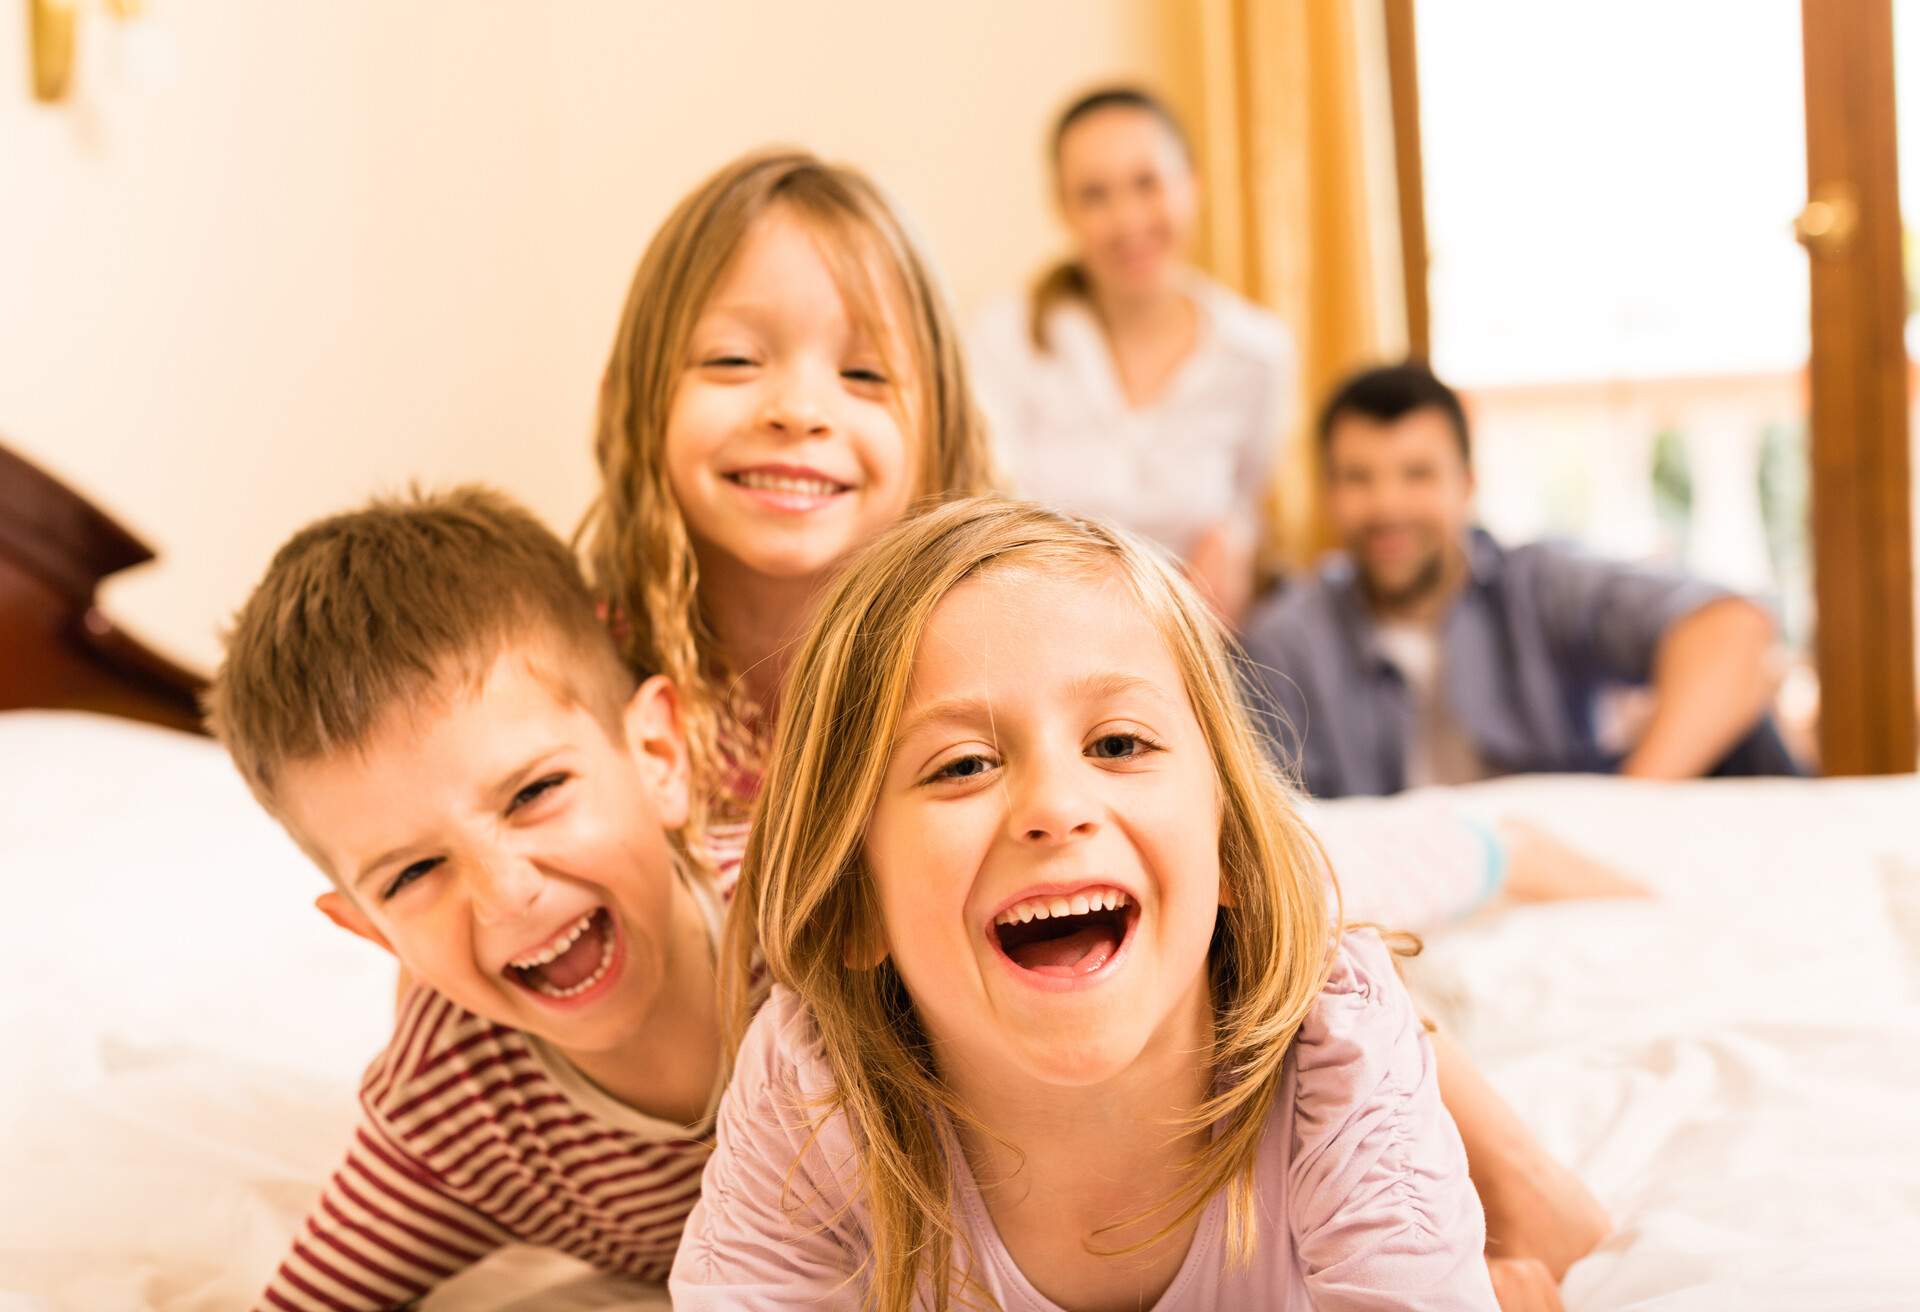 THEME_PEOPLE_FAMILY-IN-A-HOTEL-ROOM_GettyImages-499208587-1.jpg